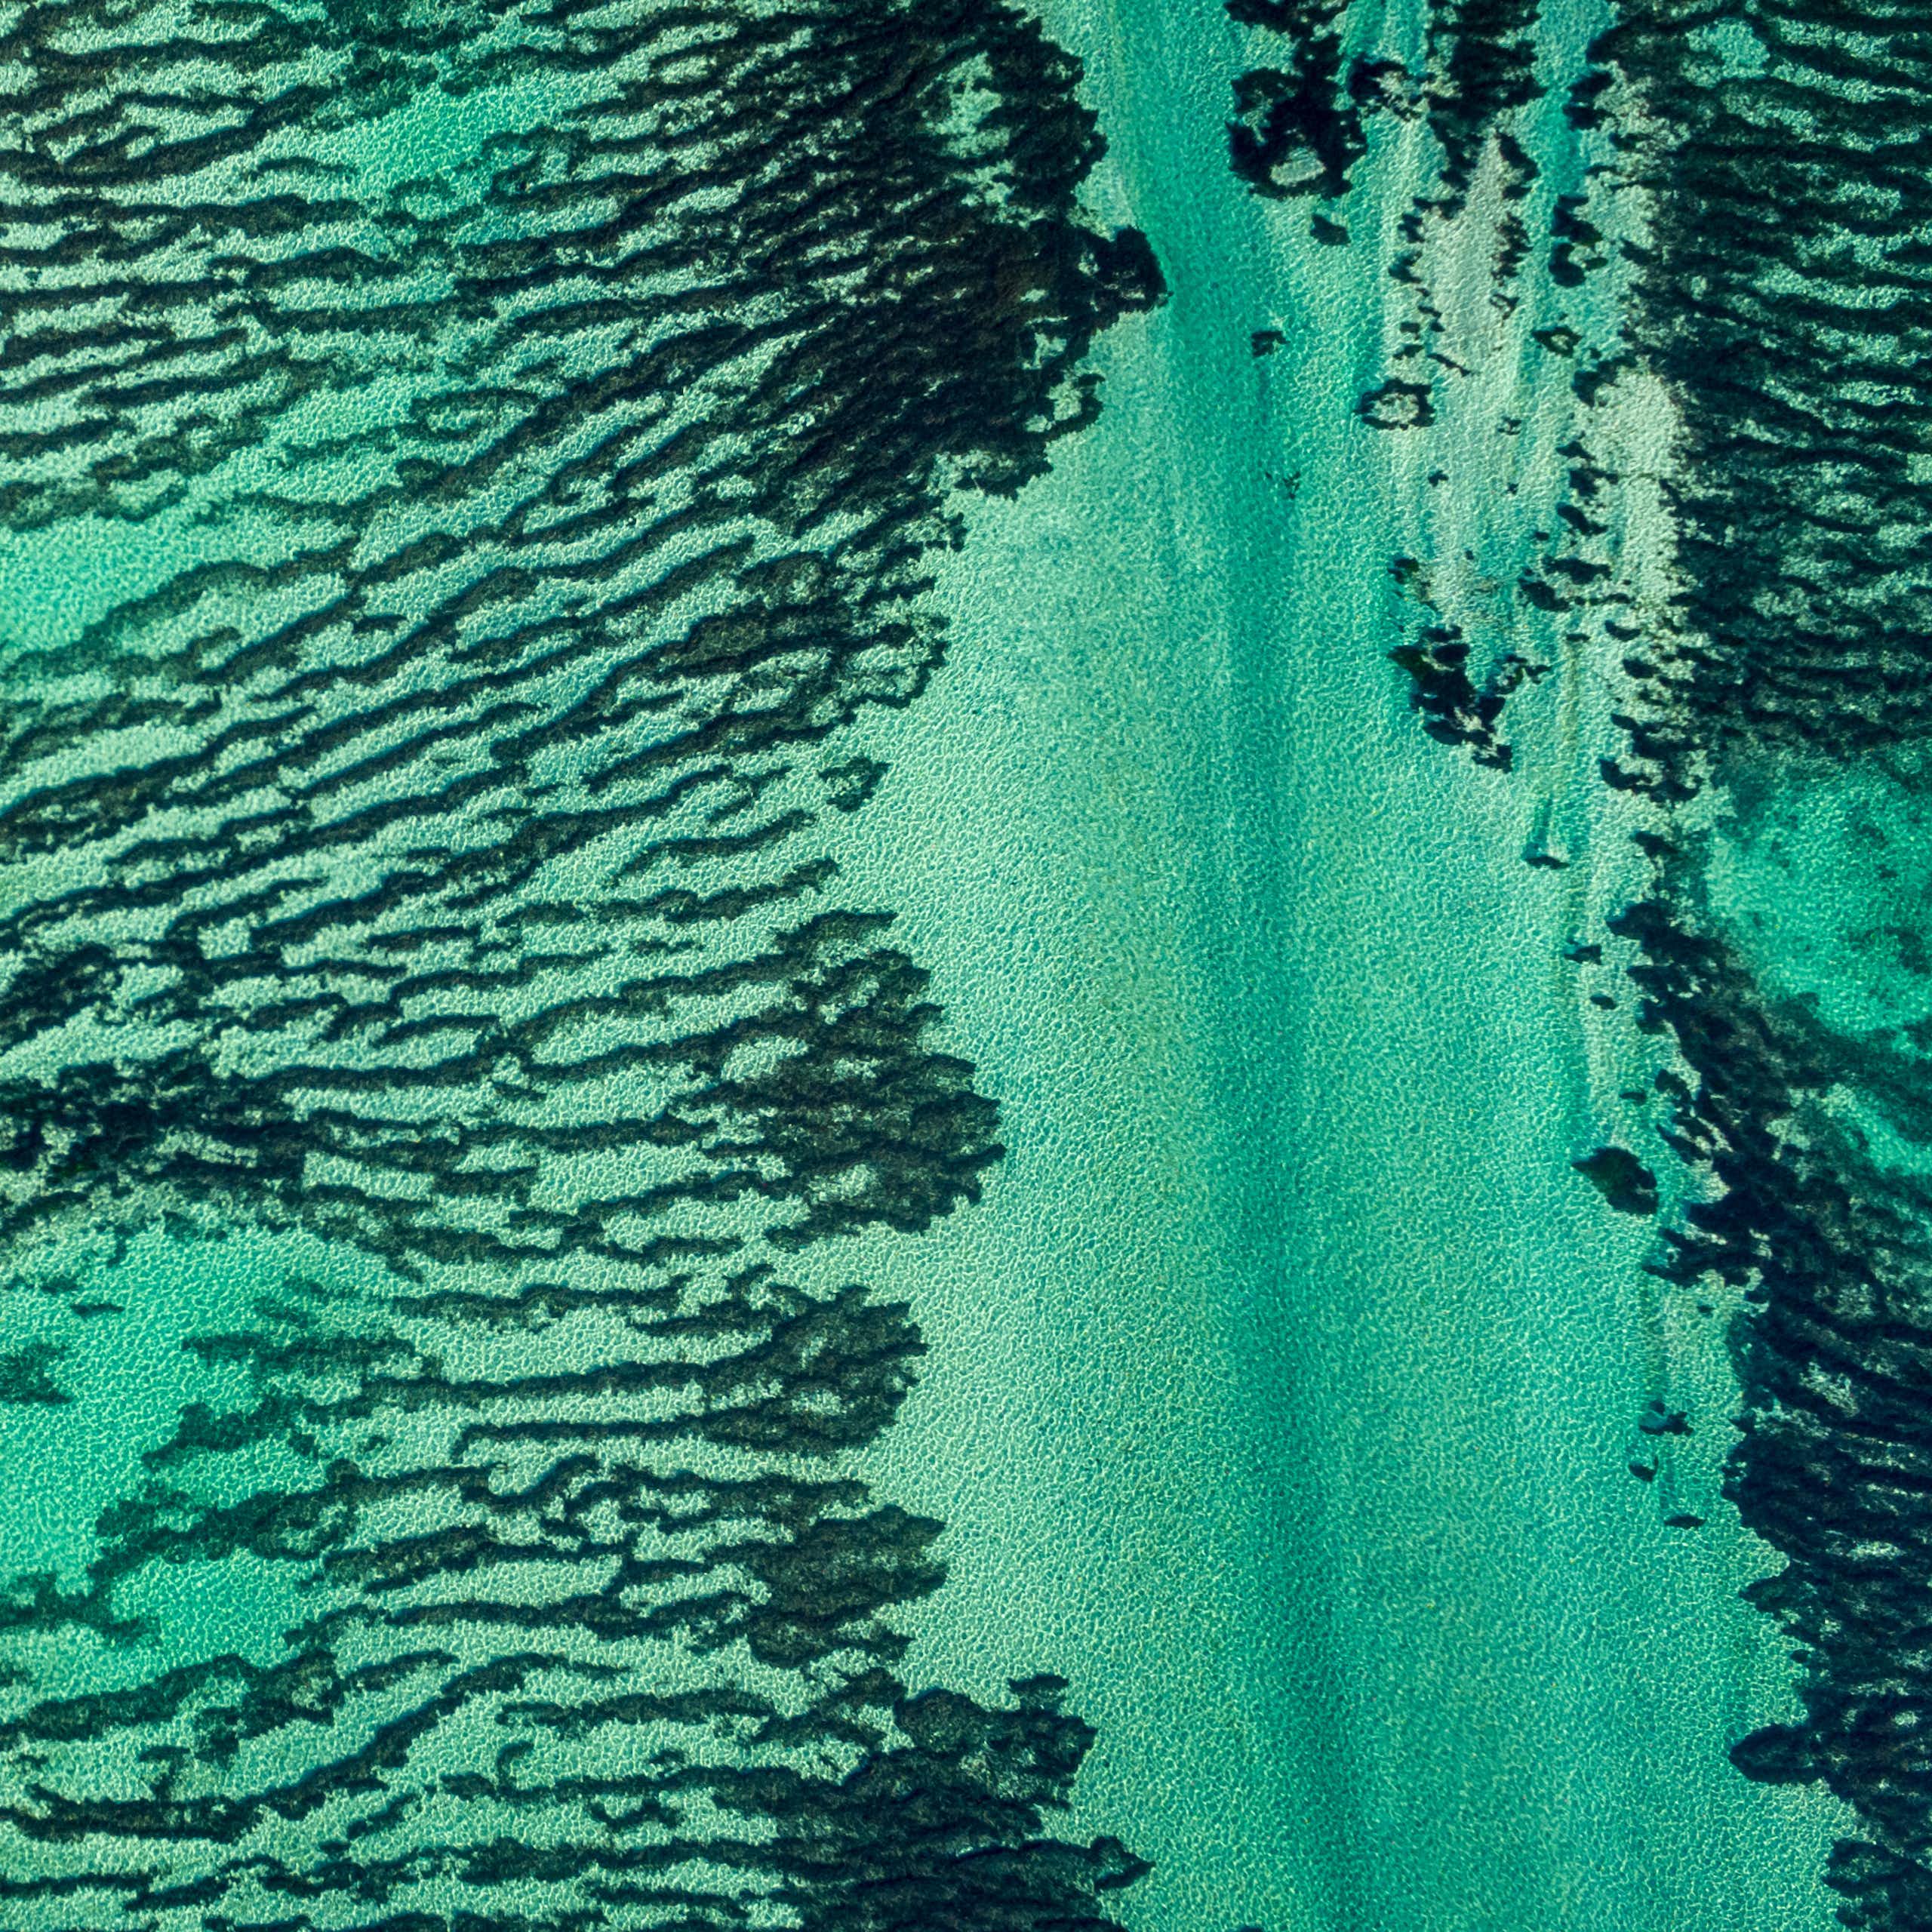 aerial shot of green blue water, dark patches of seagrass meadow striated across sea floor